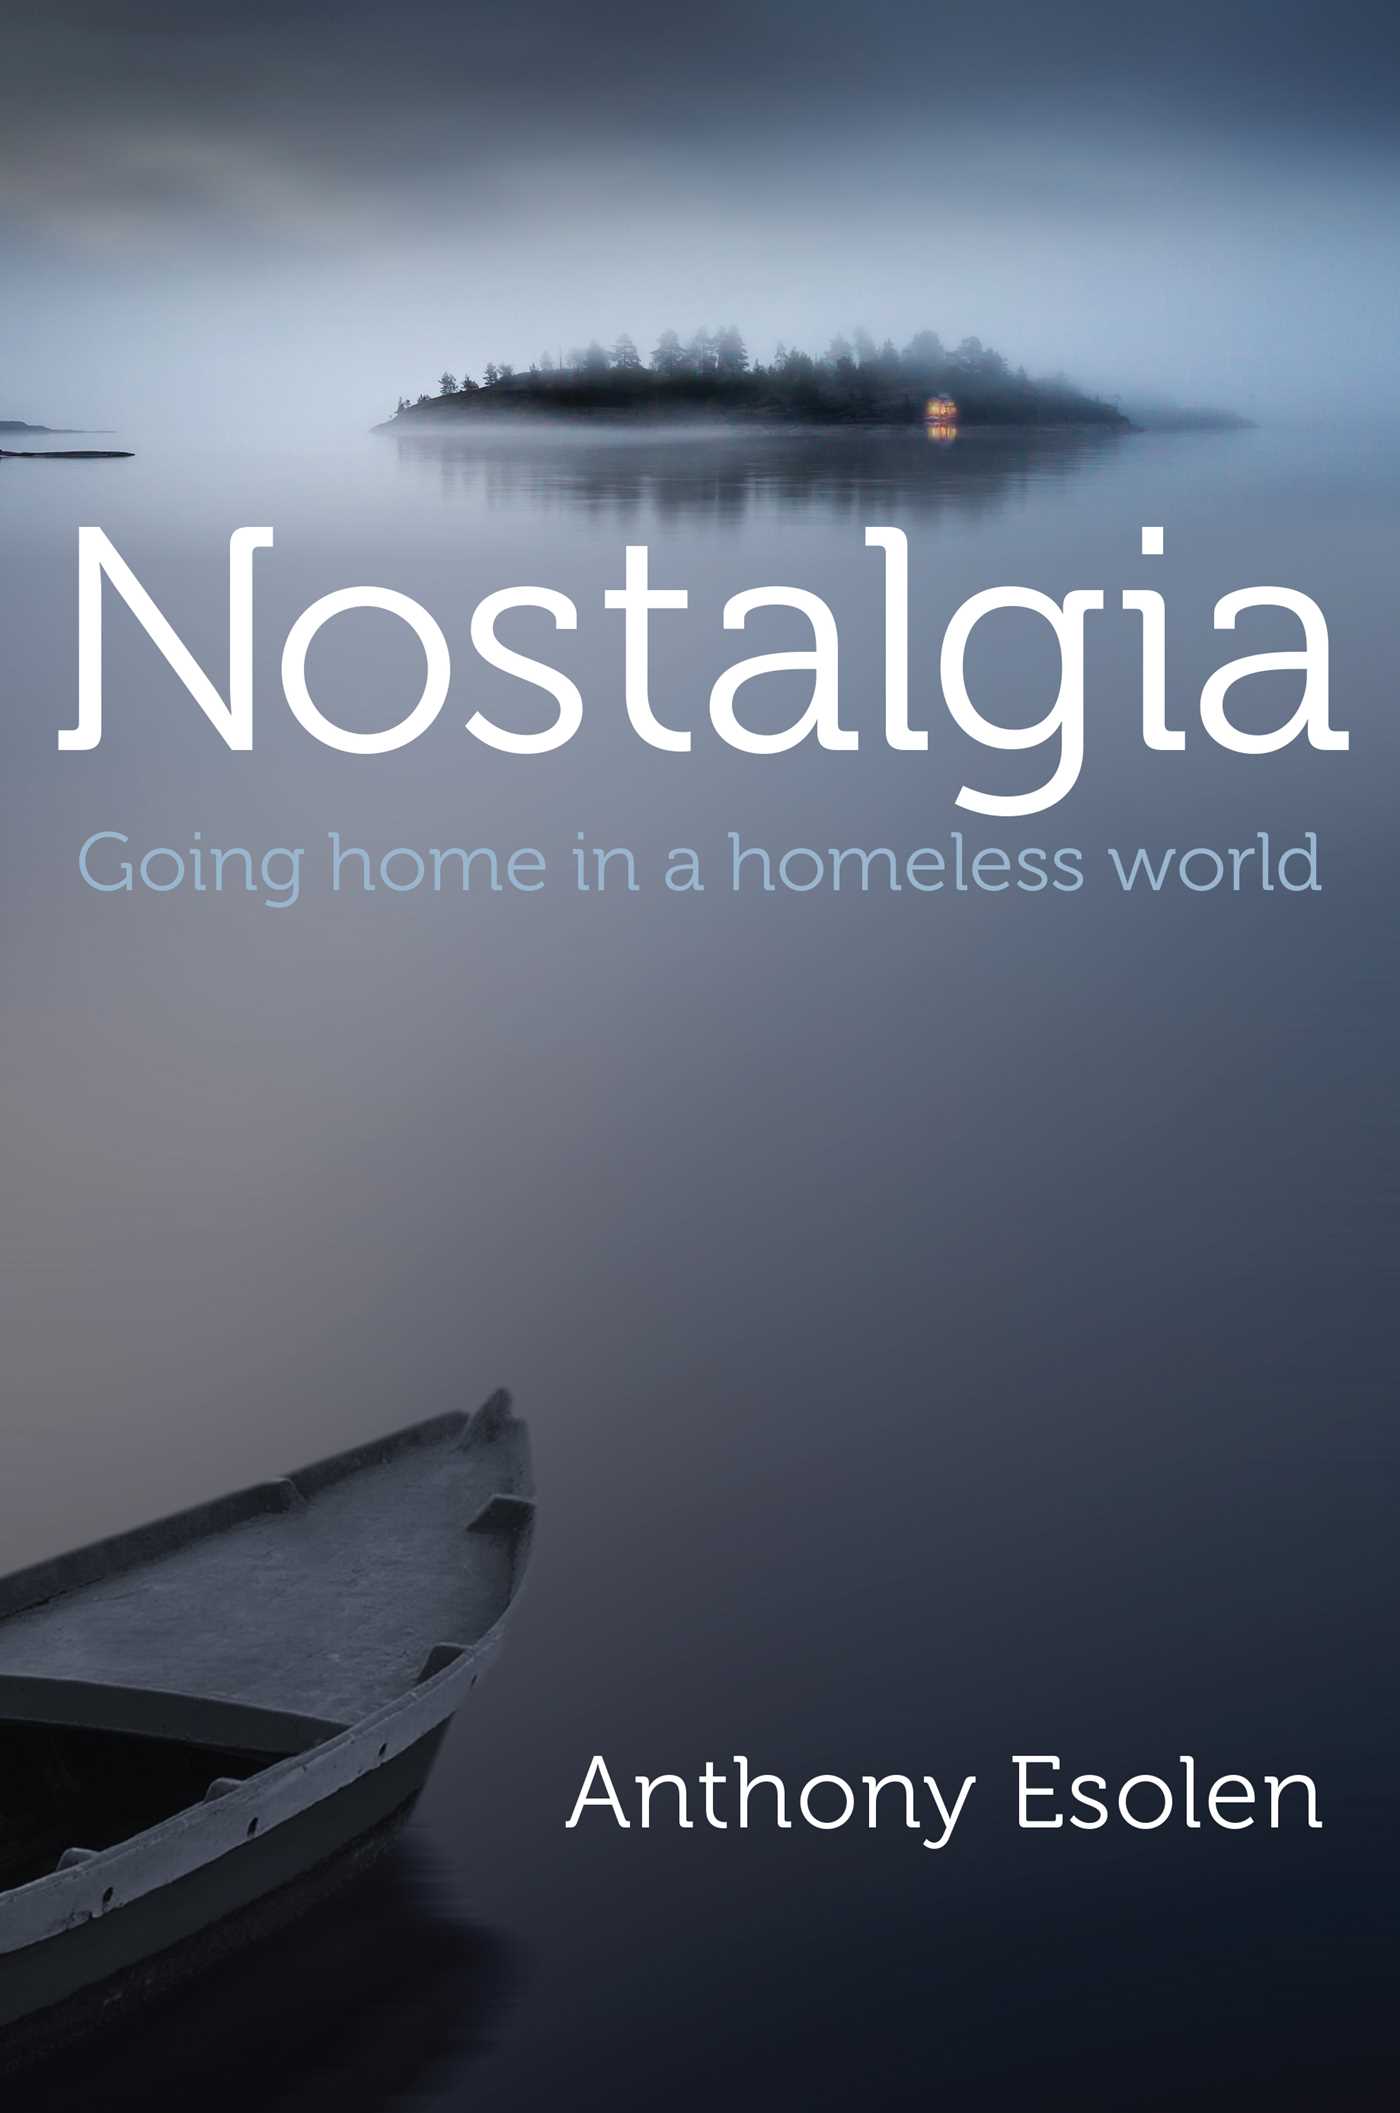 Nostalgia | Book by Anthony Esolen | Official Publisher Page | Simon ...